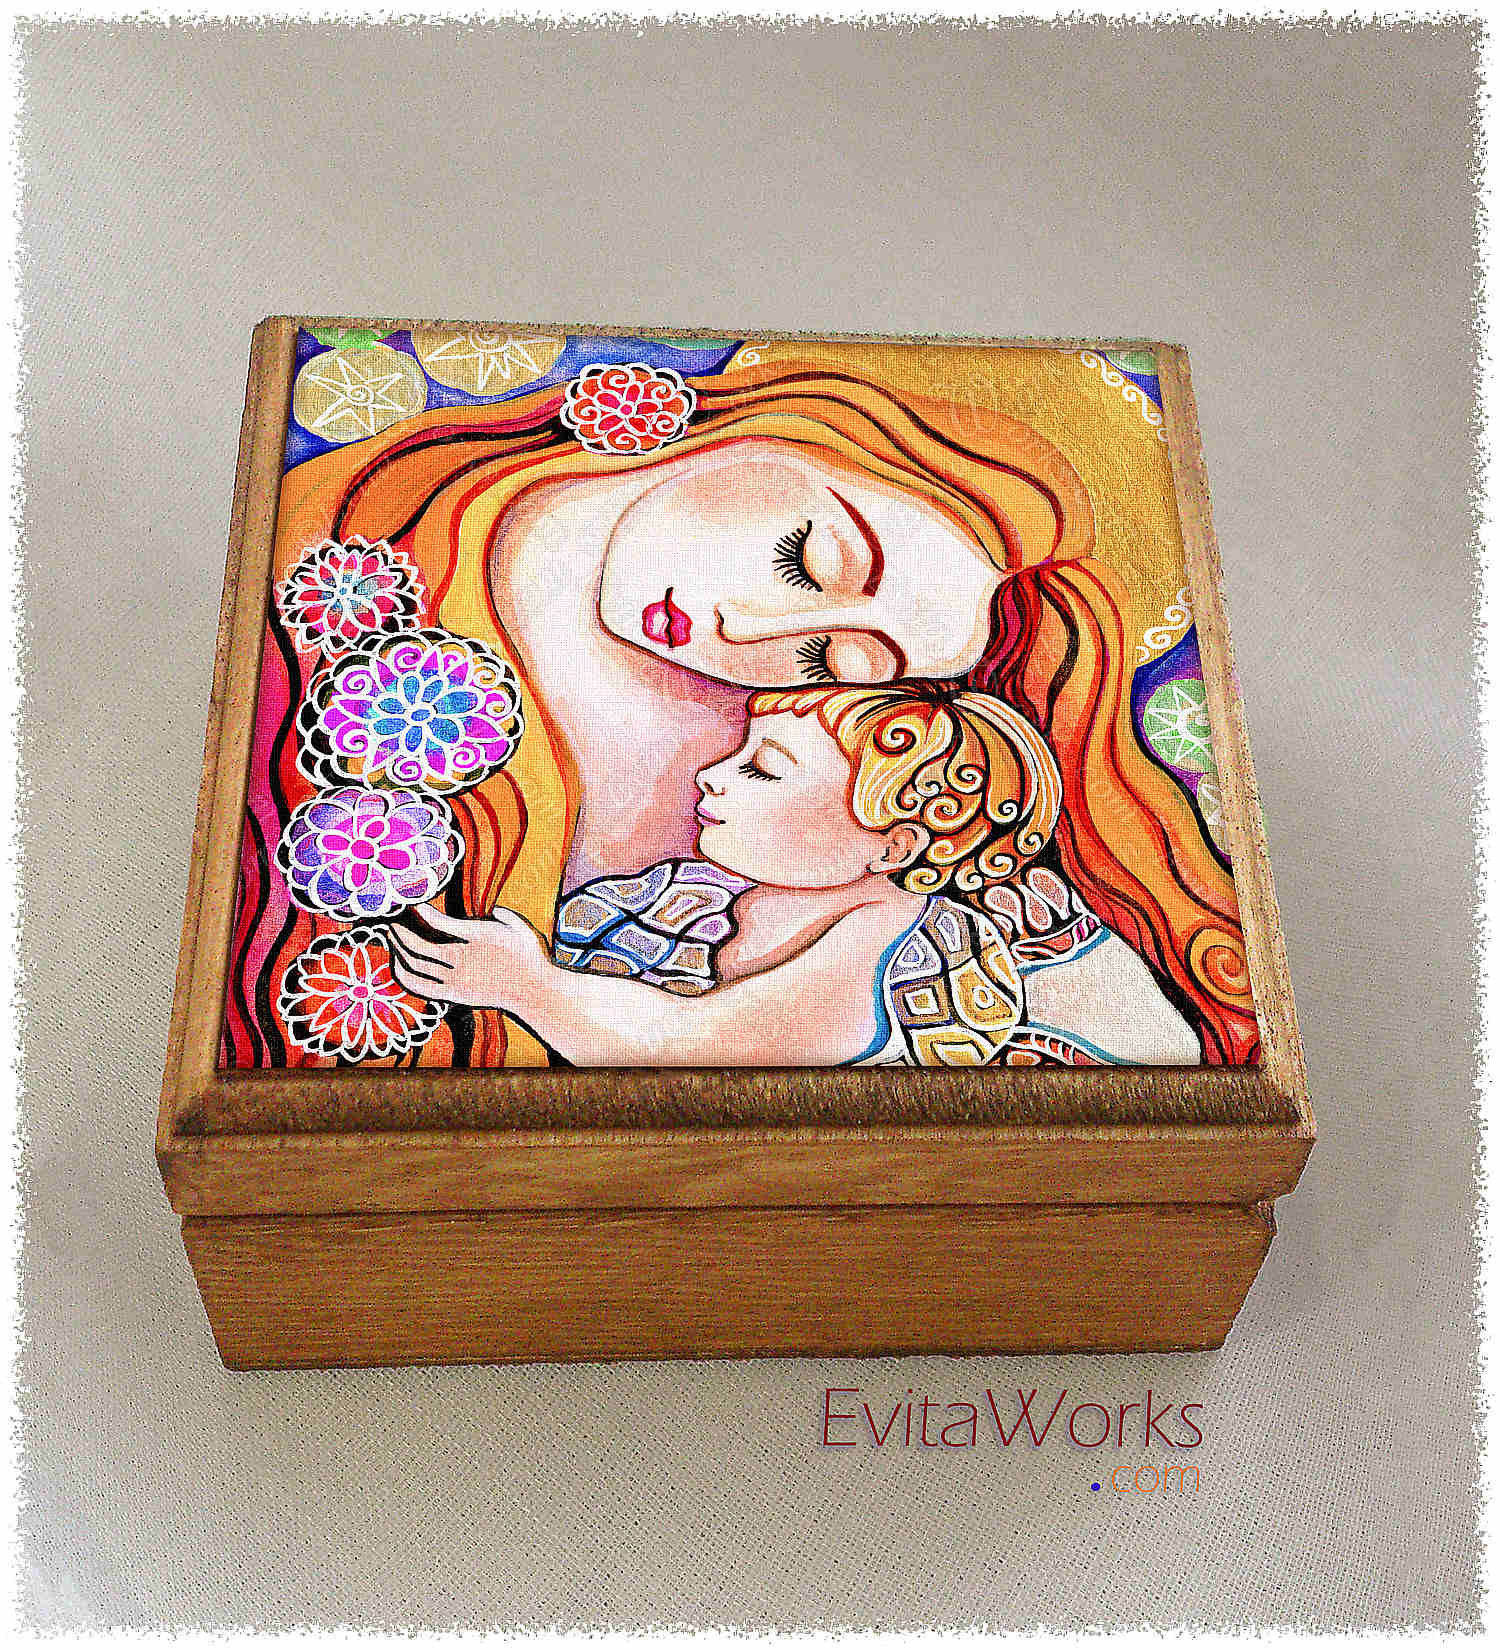 oa mother child 03 bxs ~ EvitaWorks